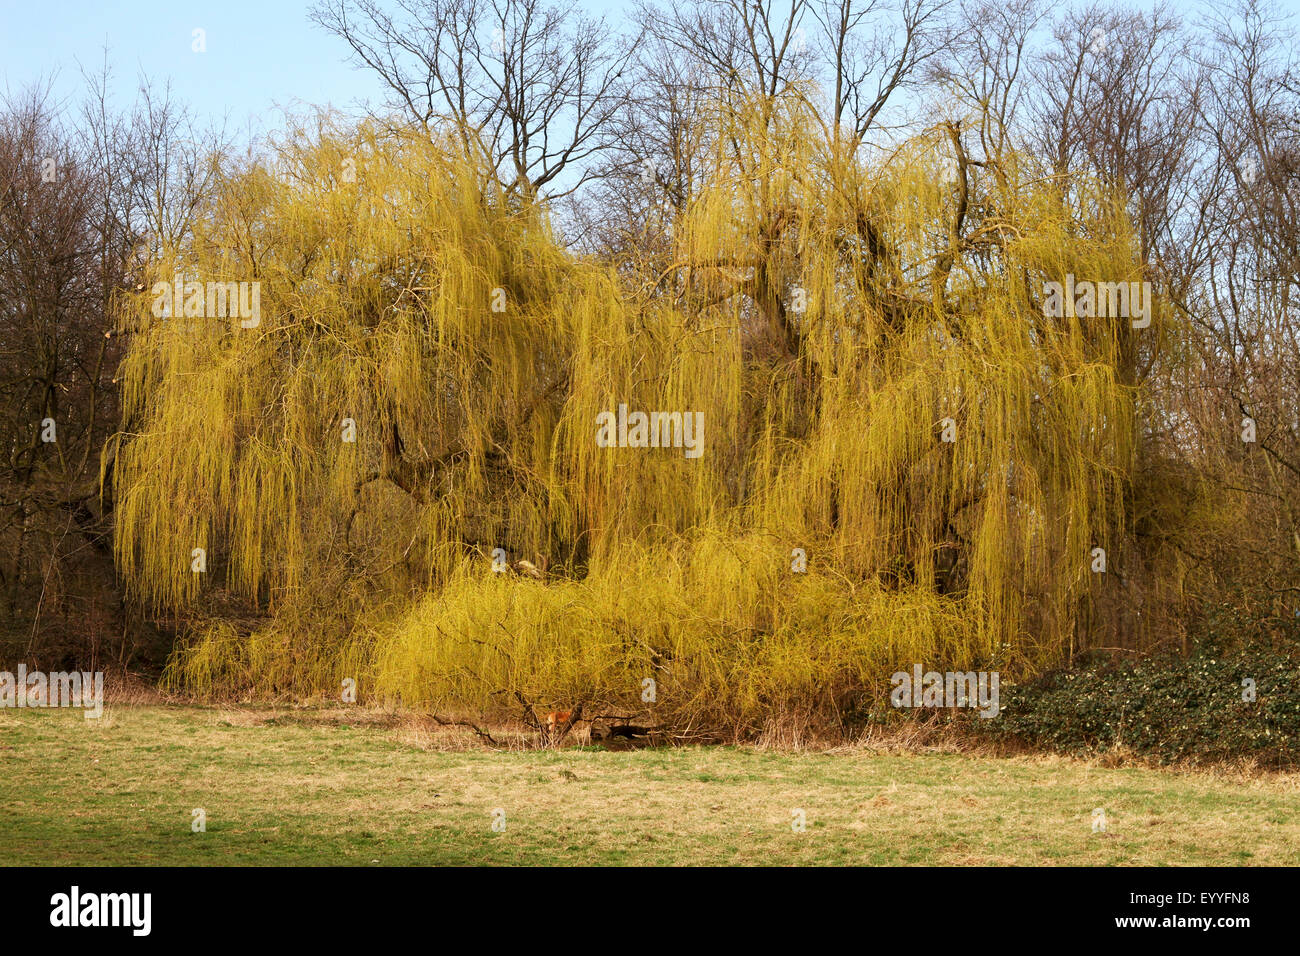 dwarf gray willow (Salix tristis), shooting in spring, Germany Stock Photo